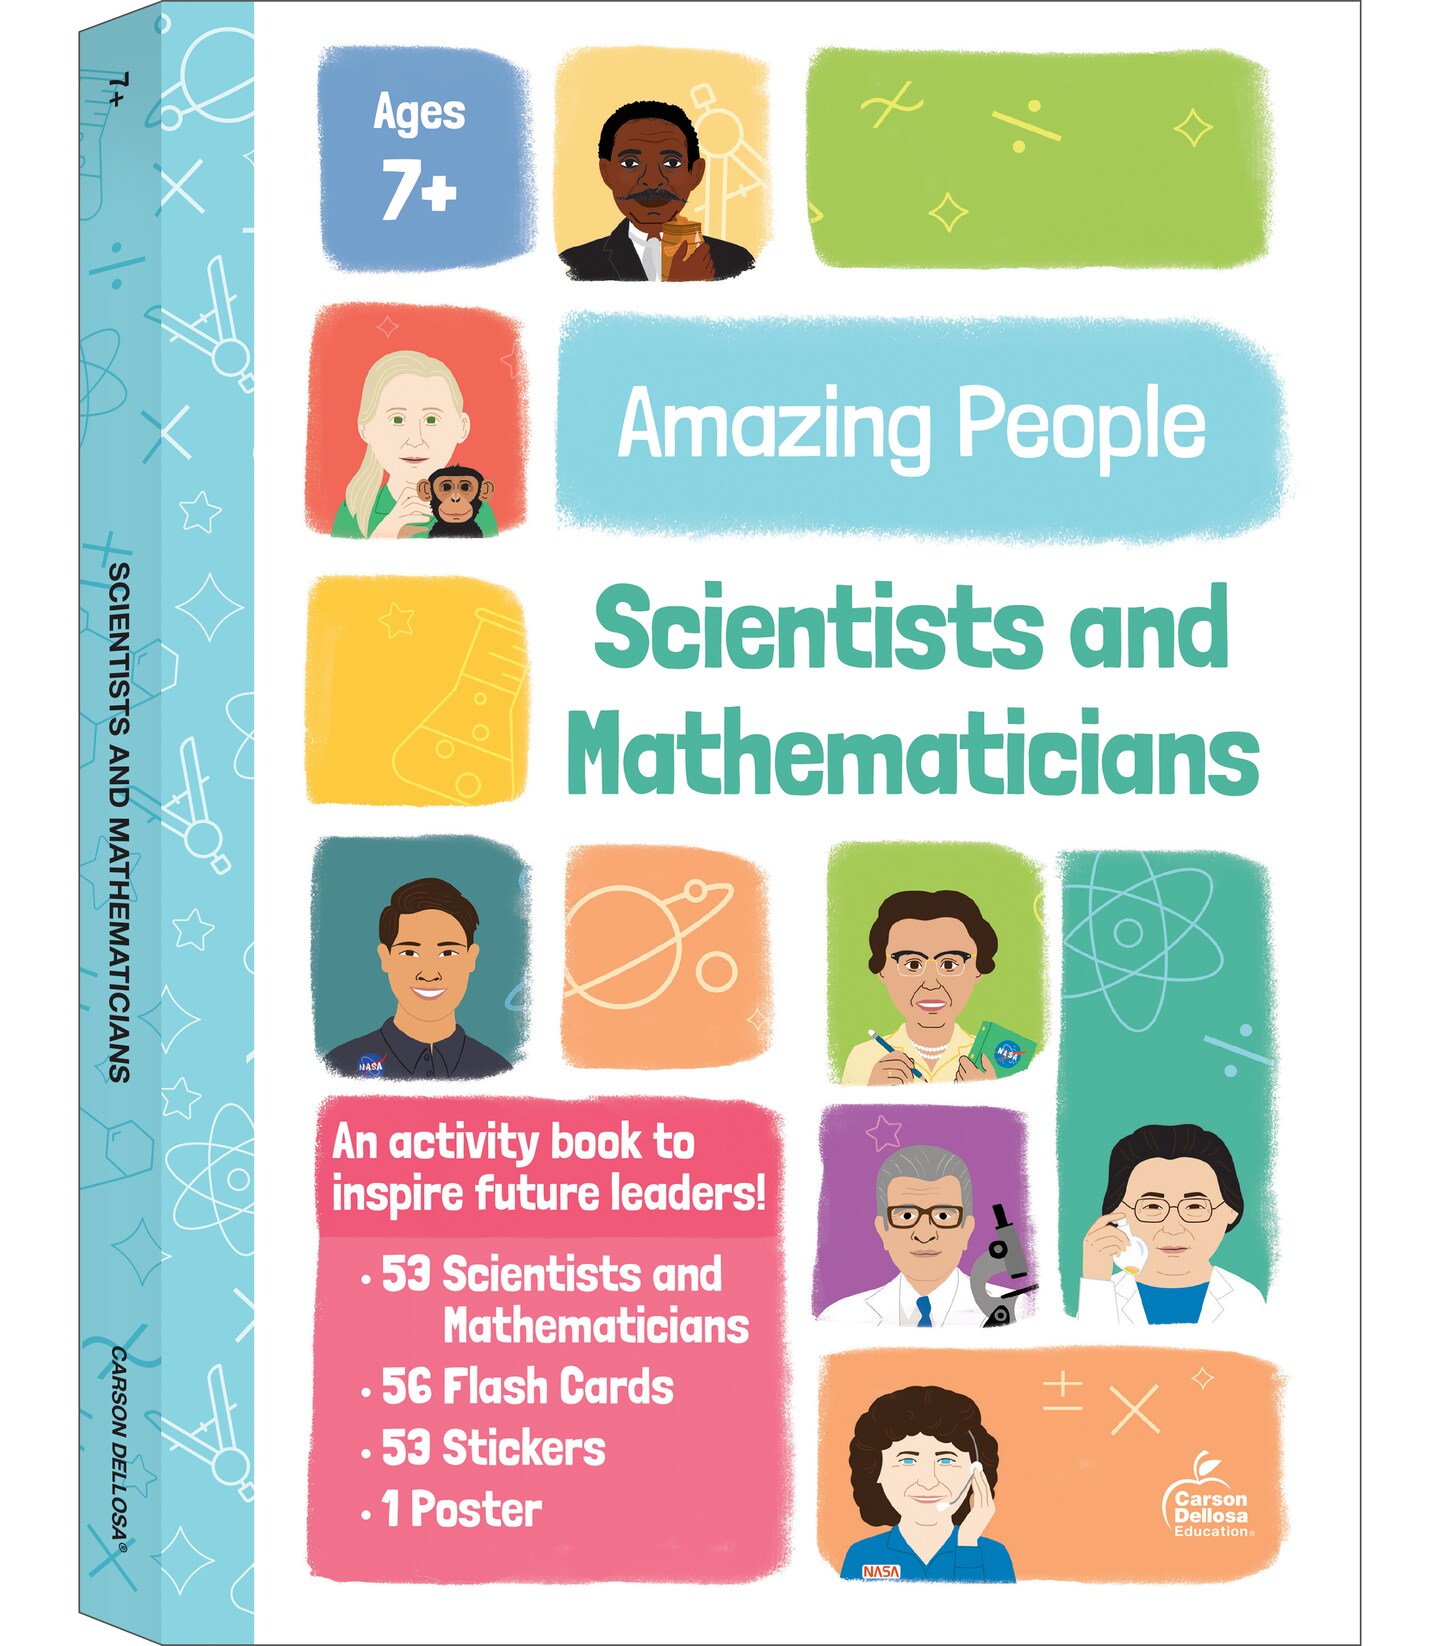 Amazing People: Scientists and Mathematicians Activity Workbook for Kids, 1st Grade, 2nd Grade, 3rd Grade Workbooks With Flash Cards, Games, Puzzles, and Stickers, STEM Activity Books for Grade 1 +